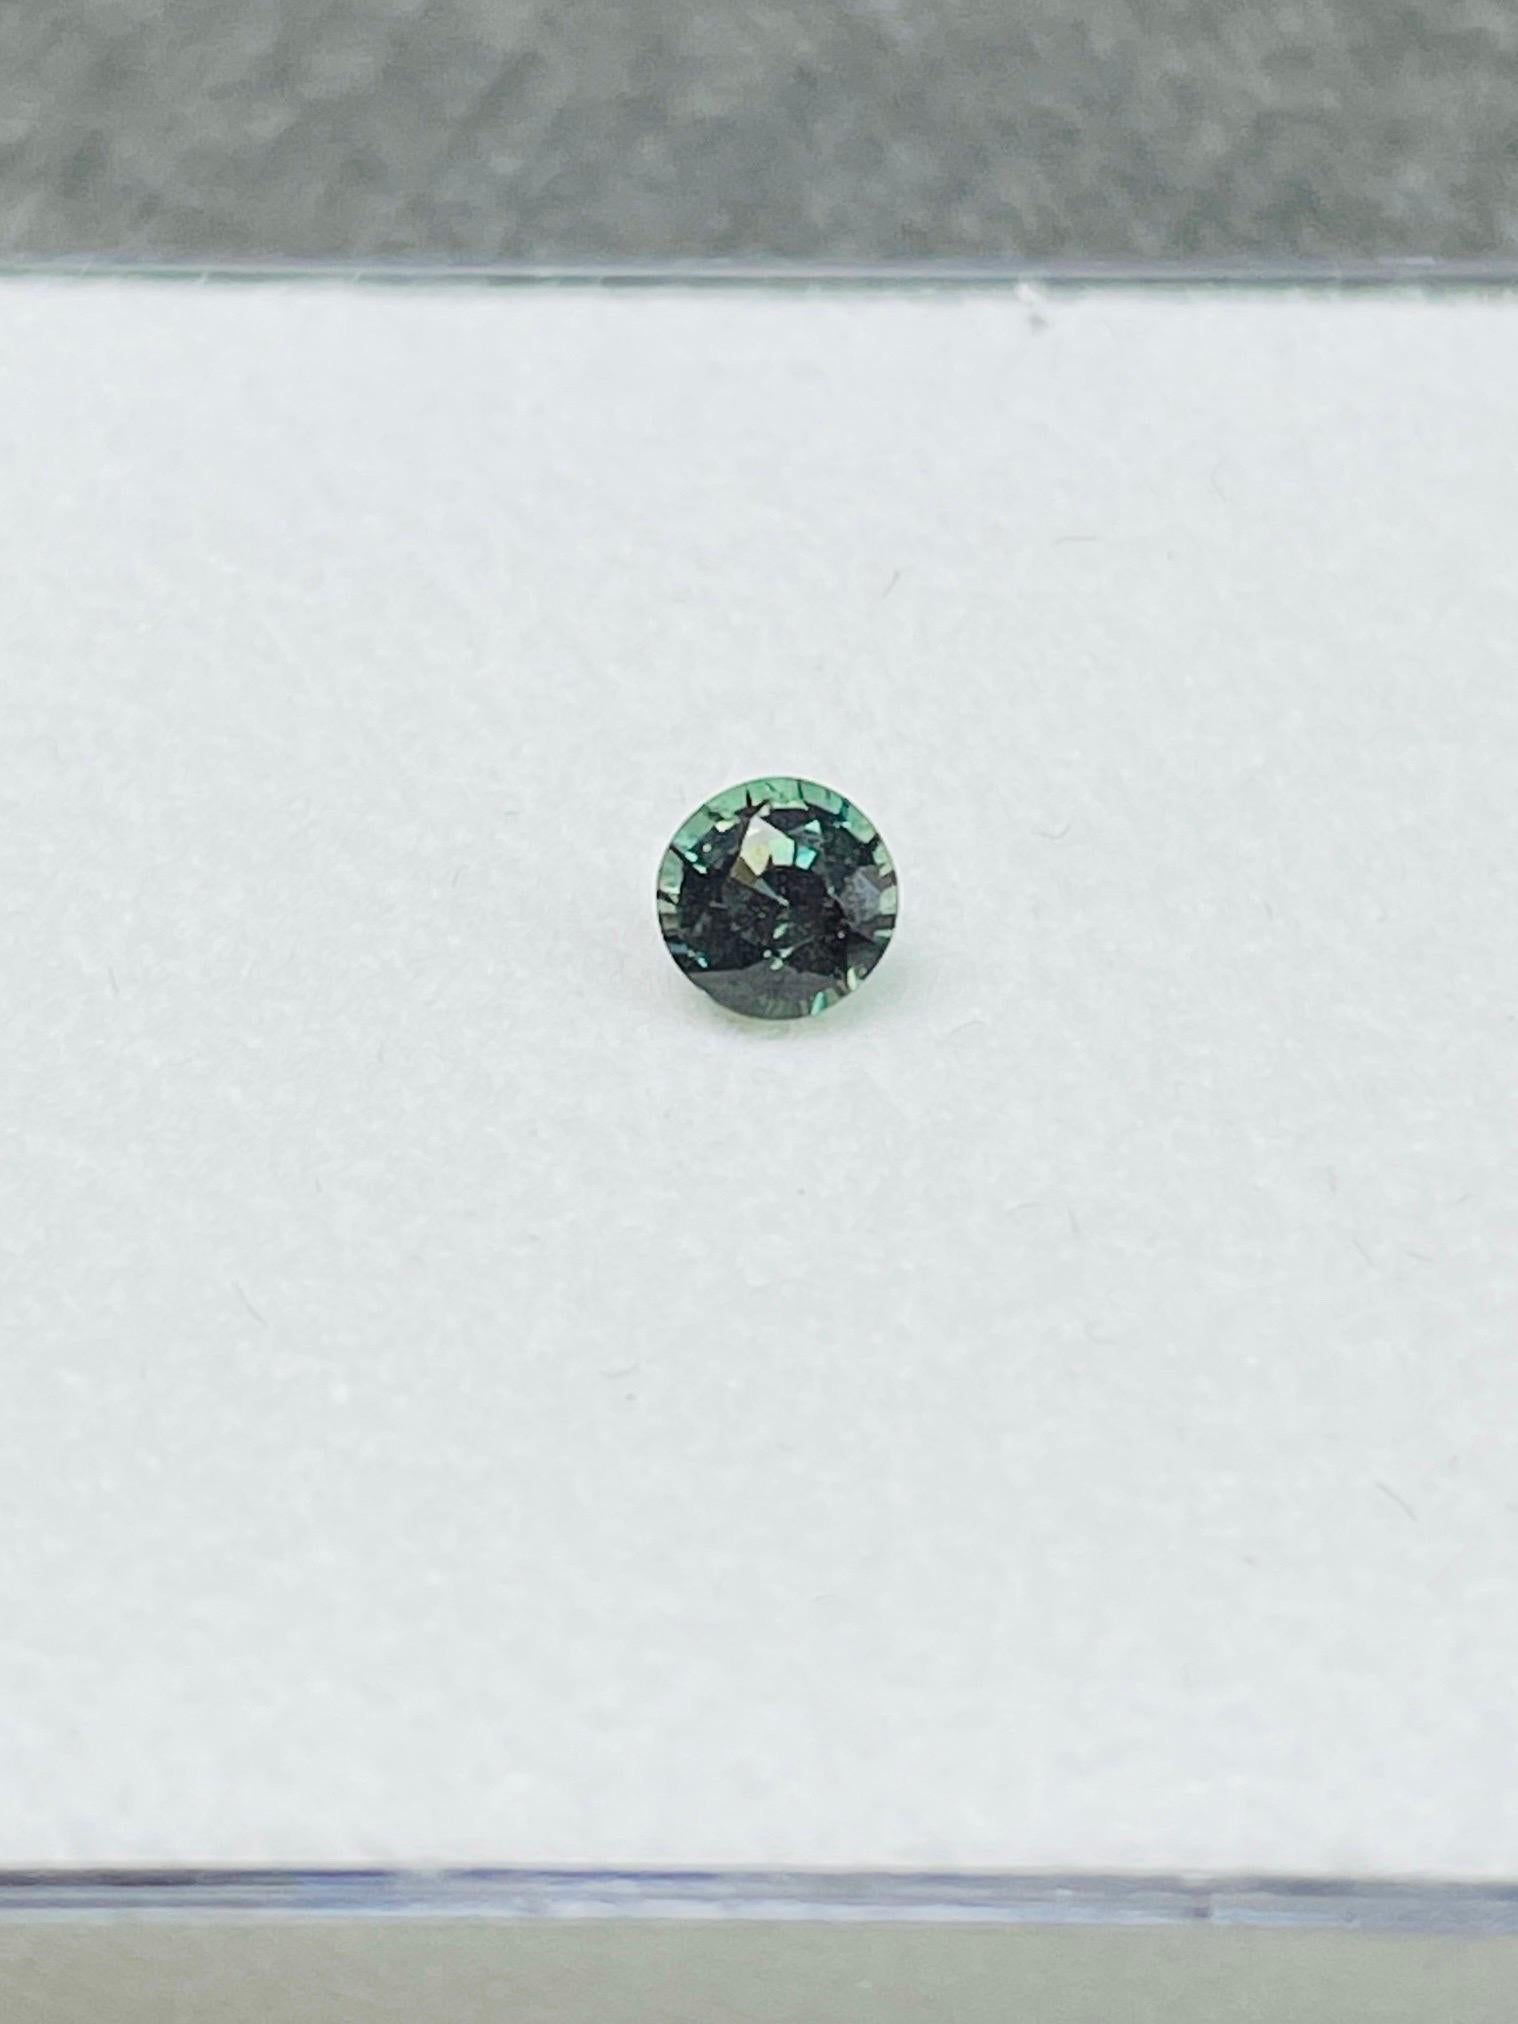 Natural Alexandrine 0.23ct deep green to pinkish color change rare gemstone  For Sale 1